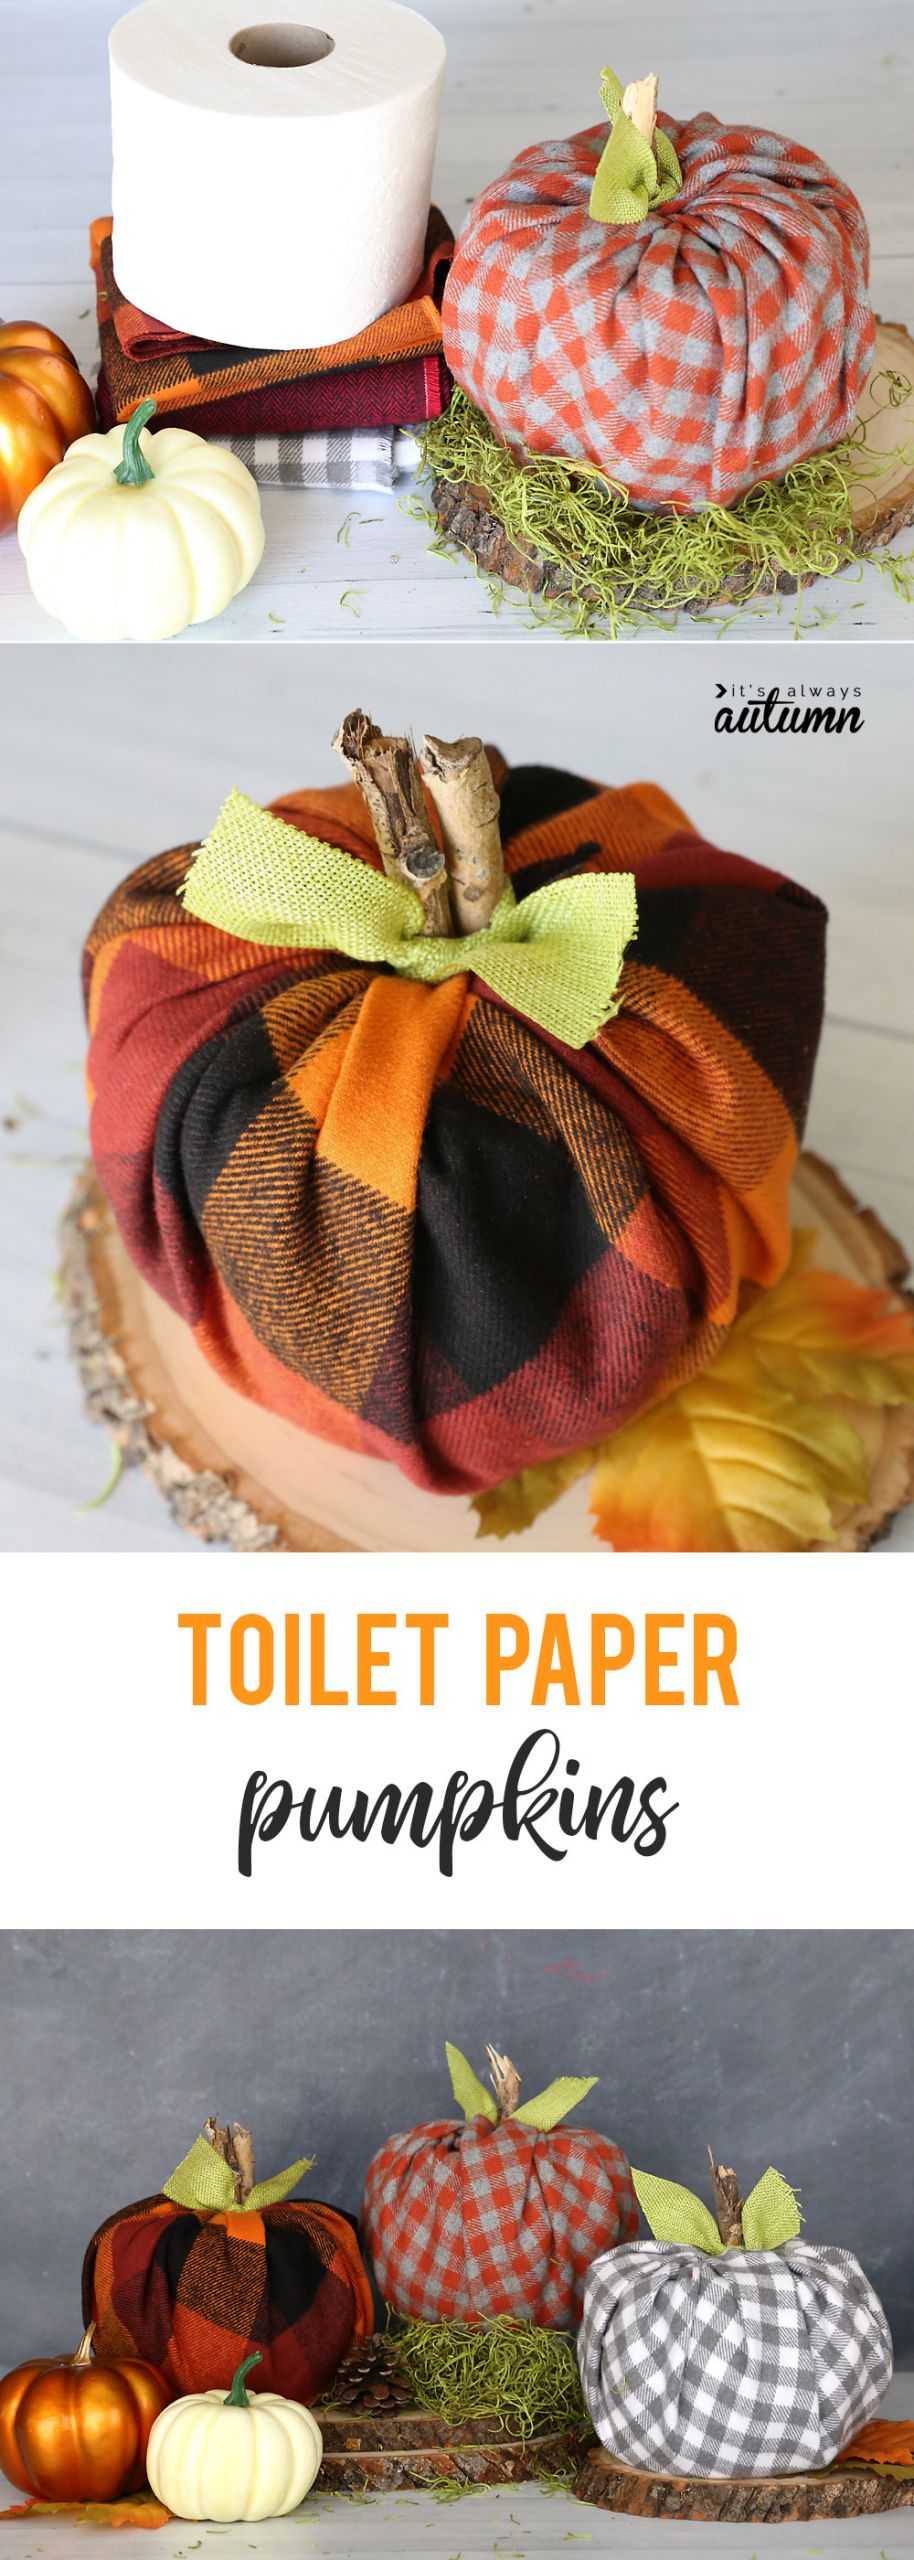 Fall Crafts To Make
 How to make cute plaid pumpkins using toilet paper rolls